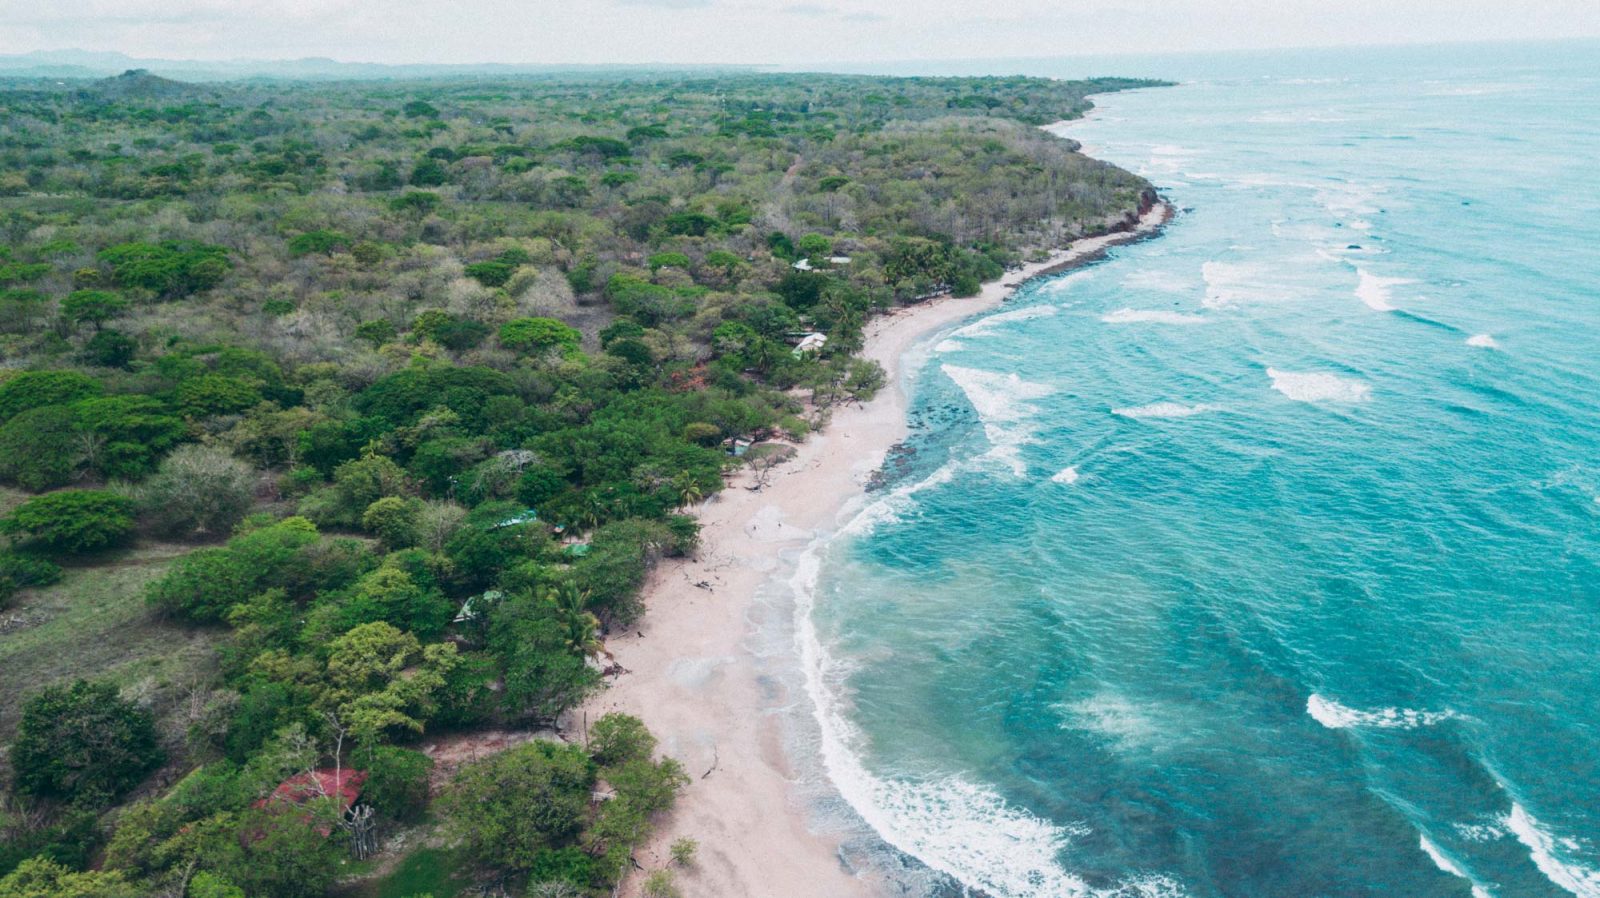 One of the best beaches in Guanacaste is Playa Avellanas